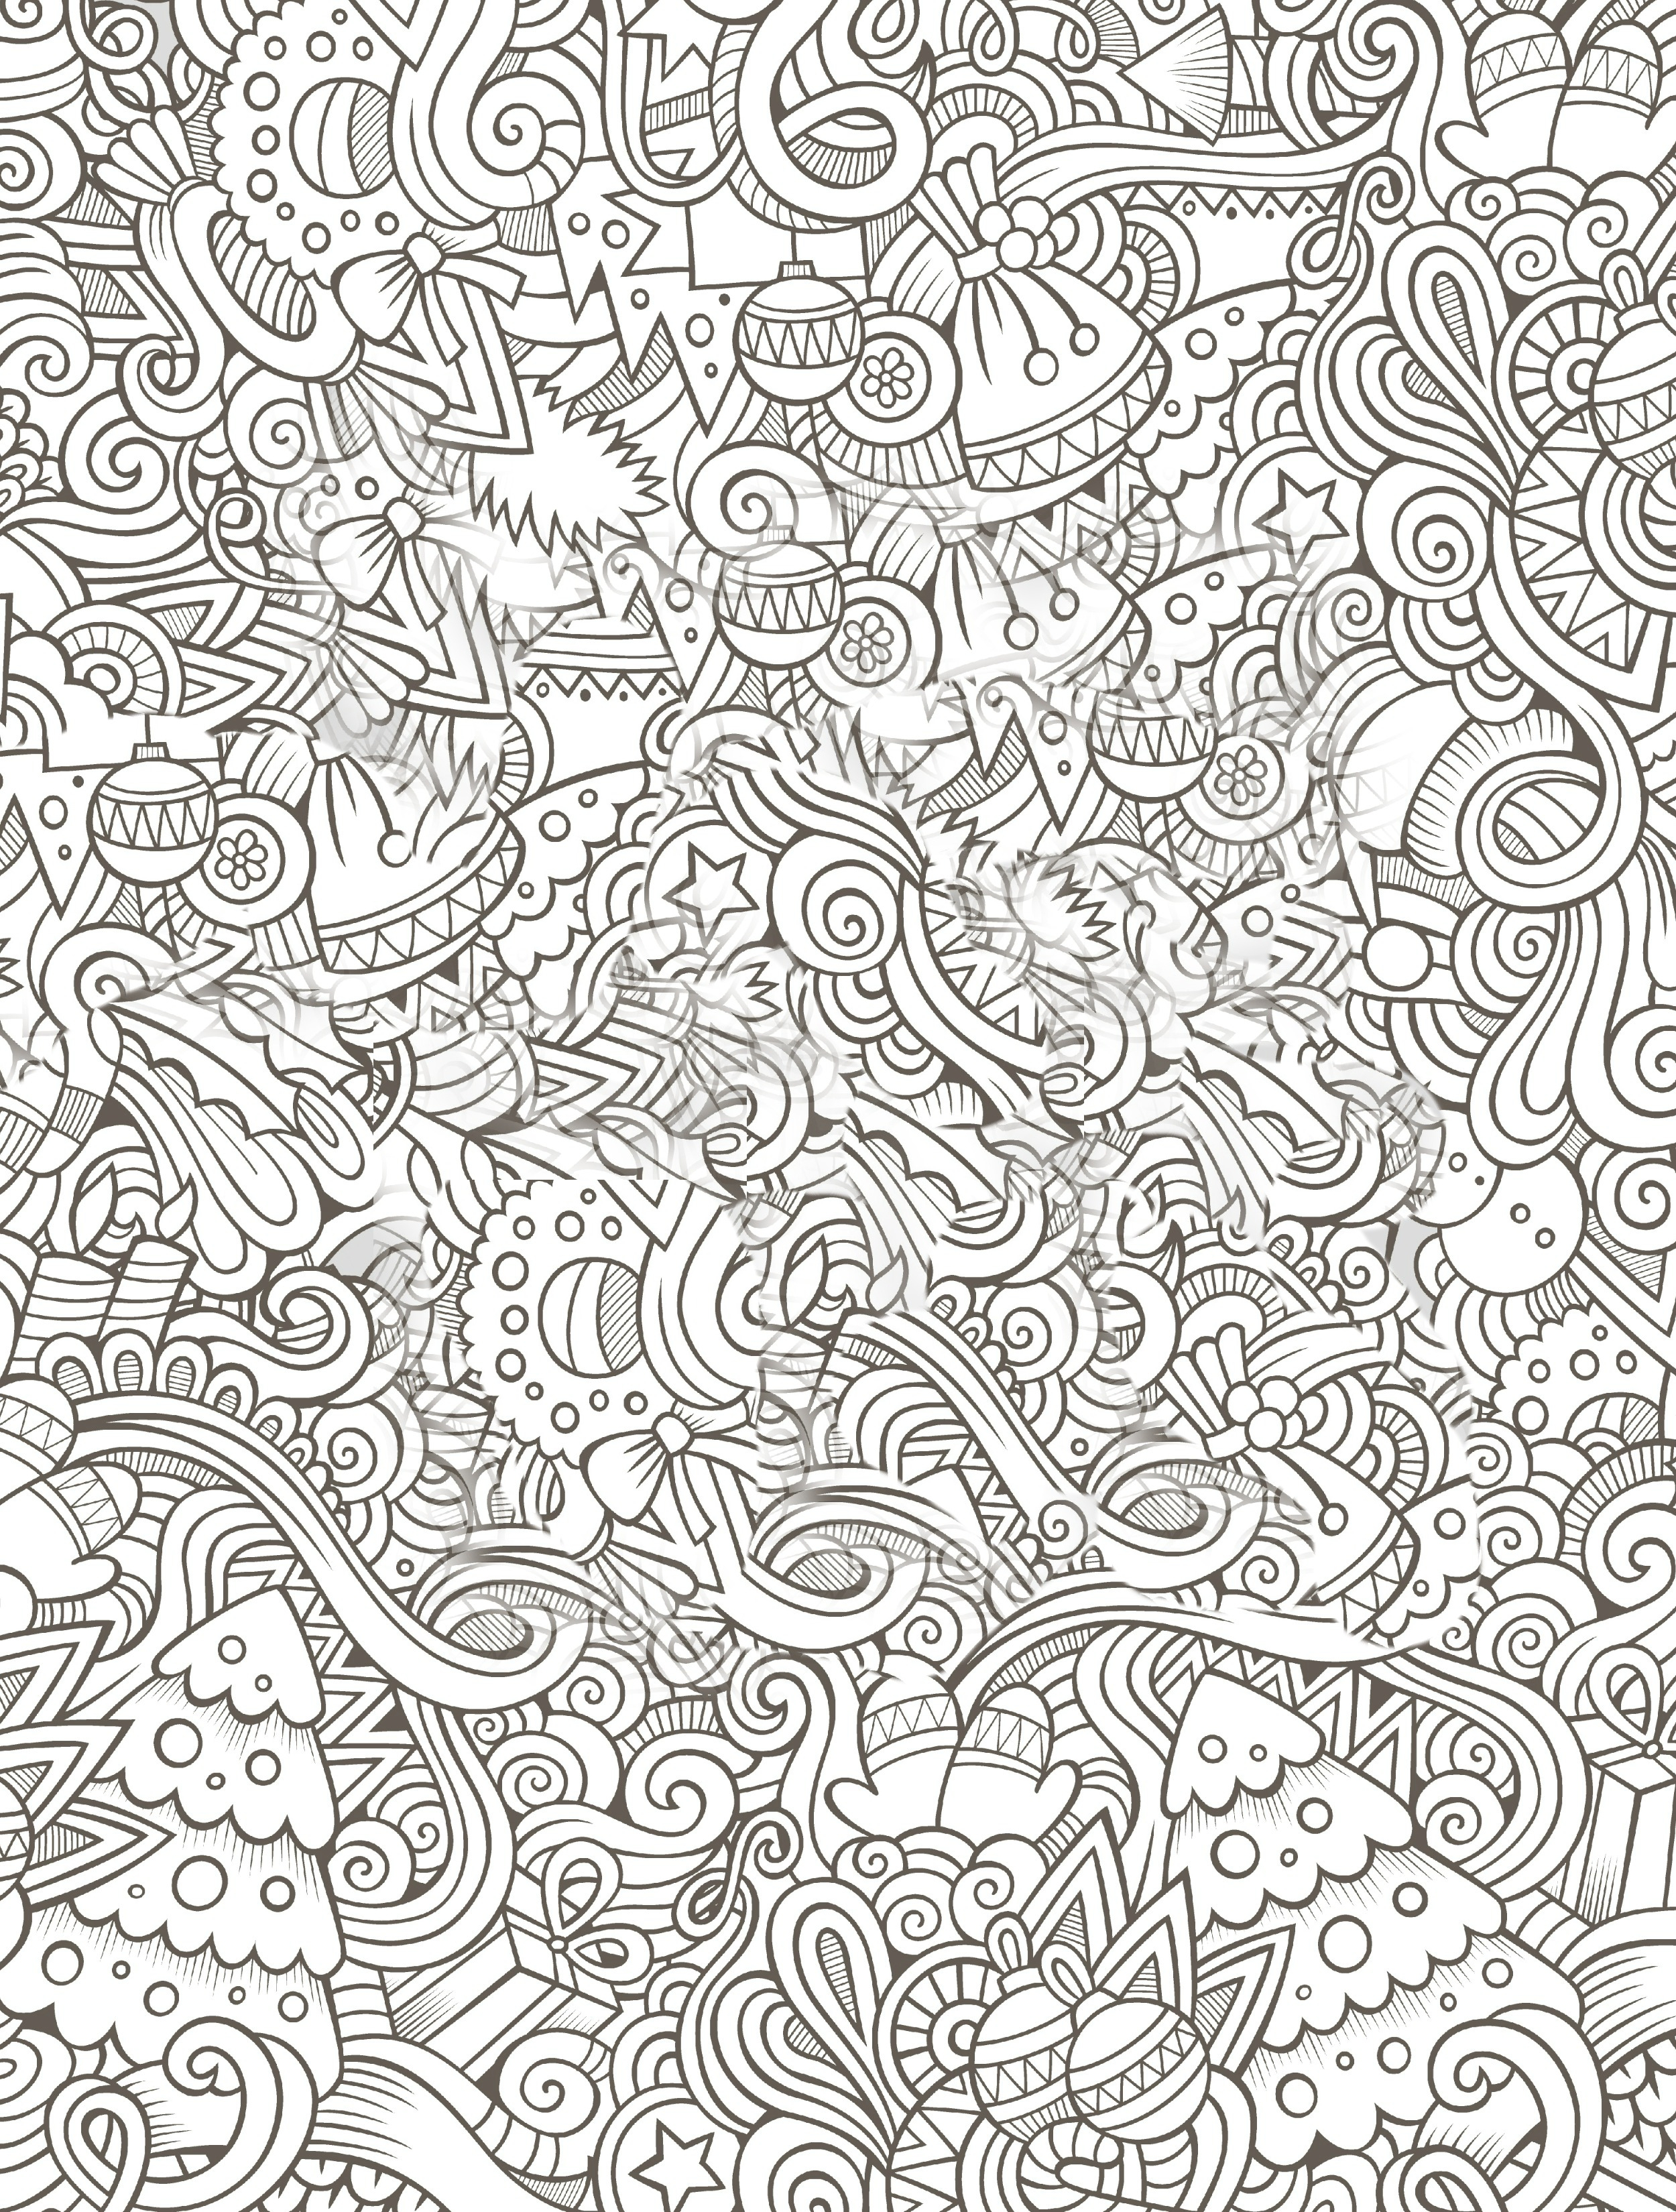 Coloring Pages : Free Printable Holiday Adult Coloring Pages Books - Free Printable Coloring Book Pages For Adults